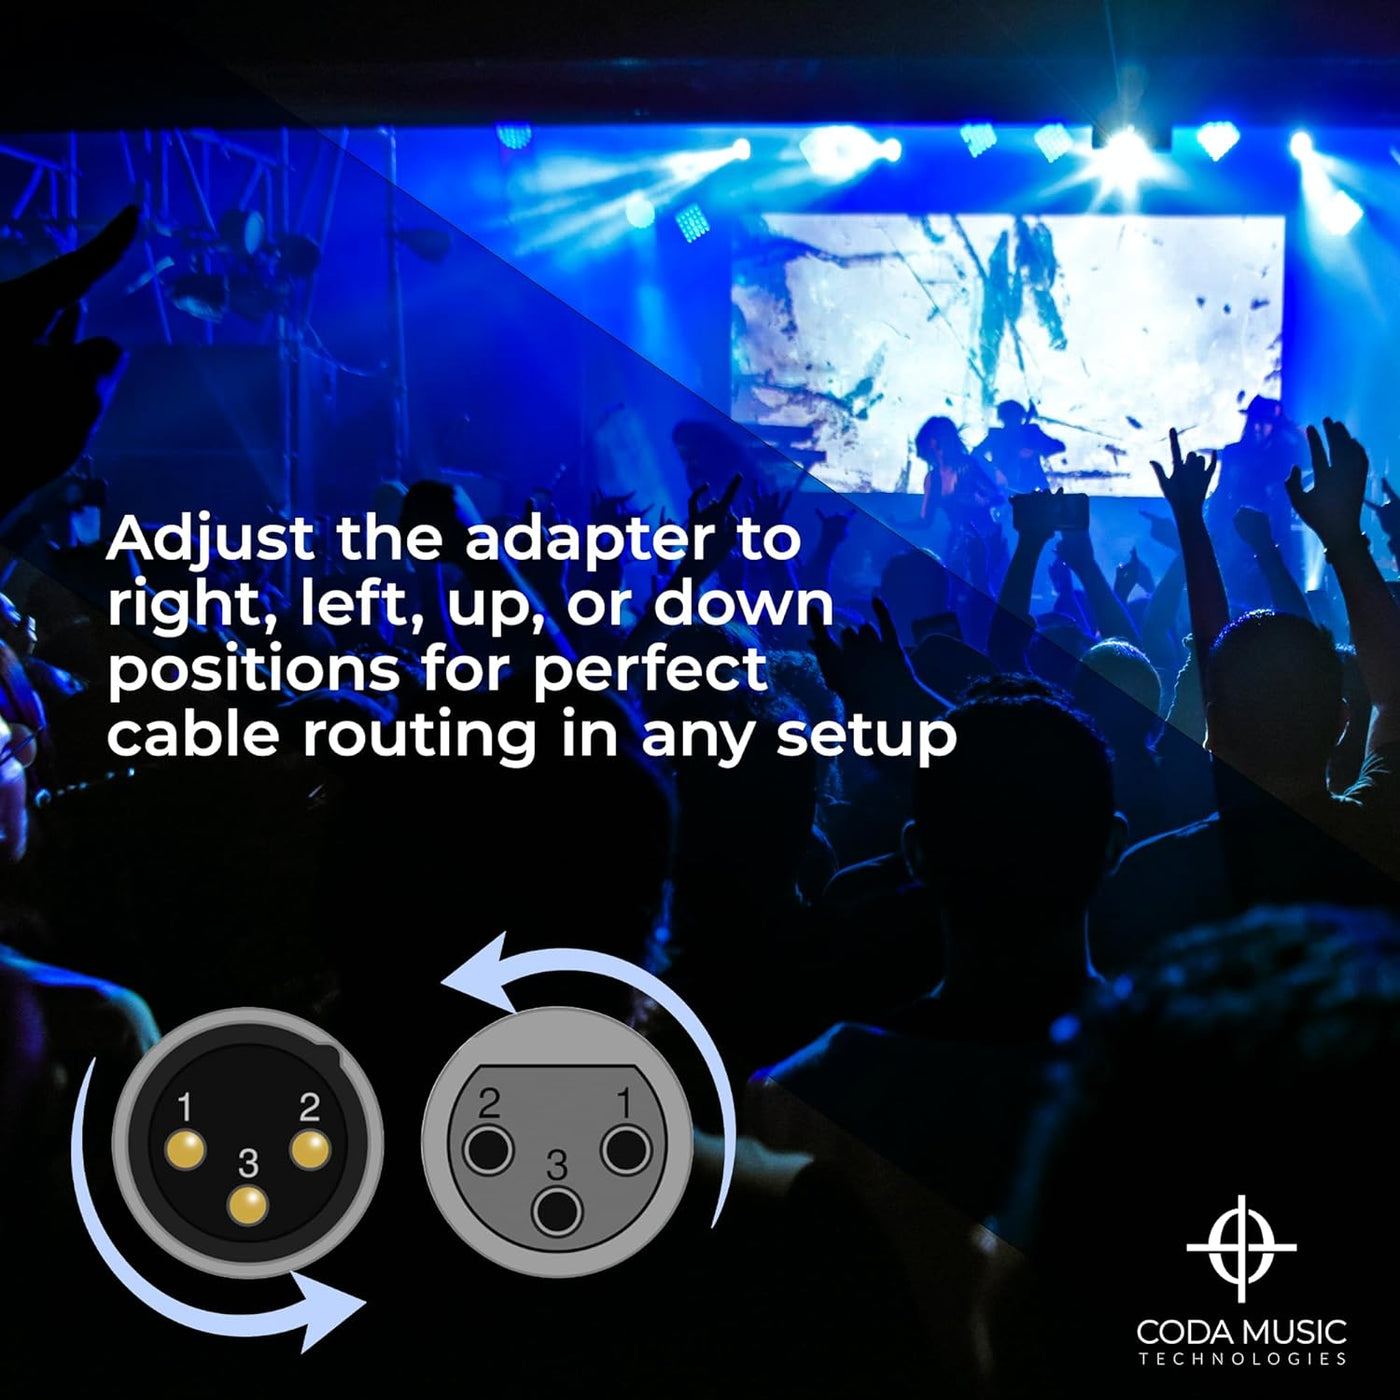 Coda Music Technologies XLR Angle Adapter - Adjustable 90 Degree Right Angle Connector, Durable Universal 3-Pin Fit, Plug and Play Setup for Musicians and Audio Engineers, Crystal Clear Audio Quality 